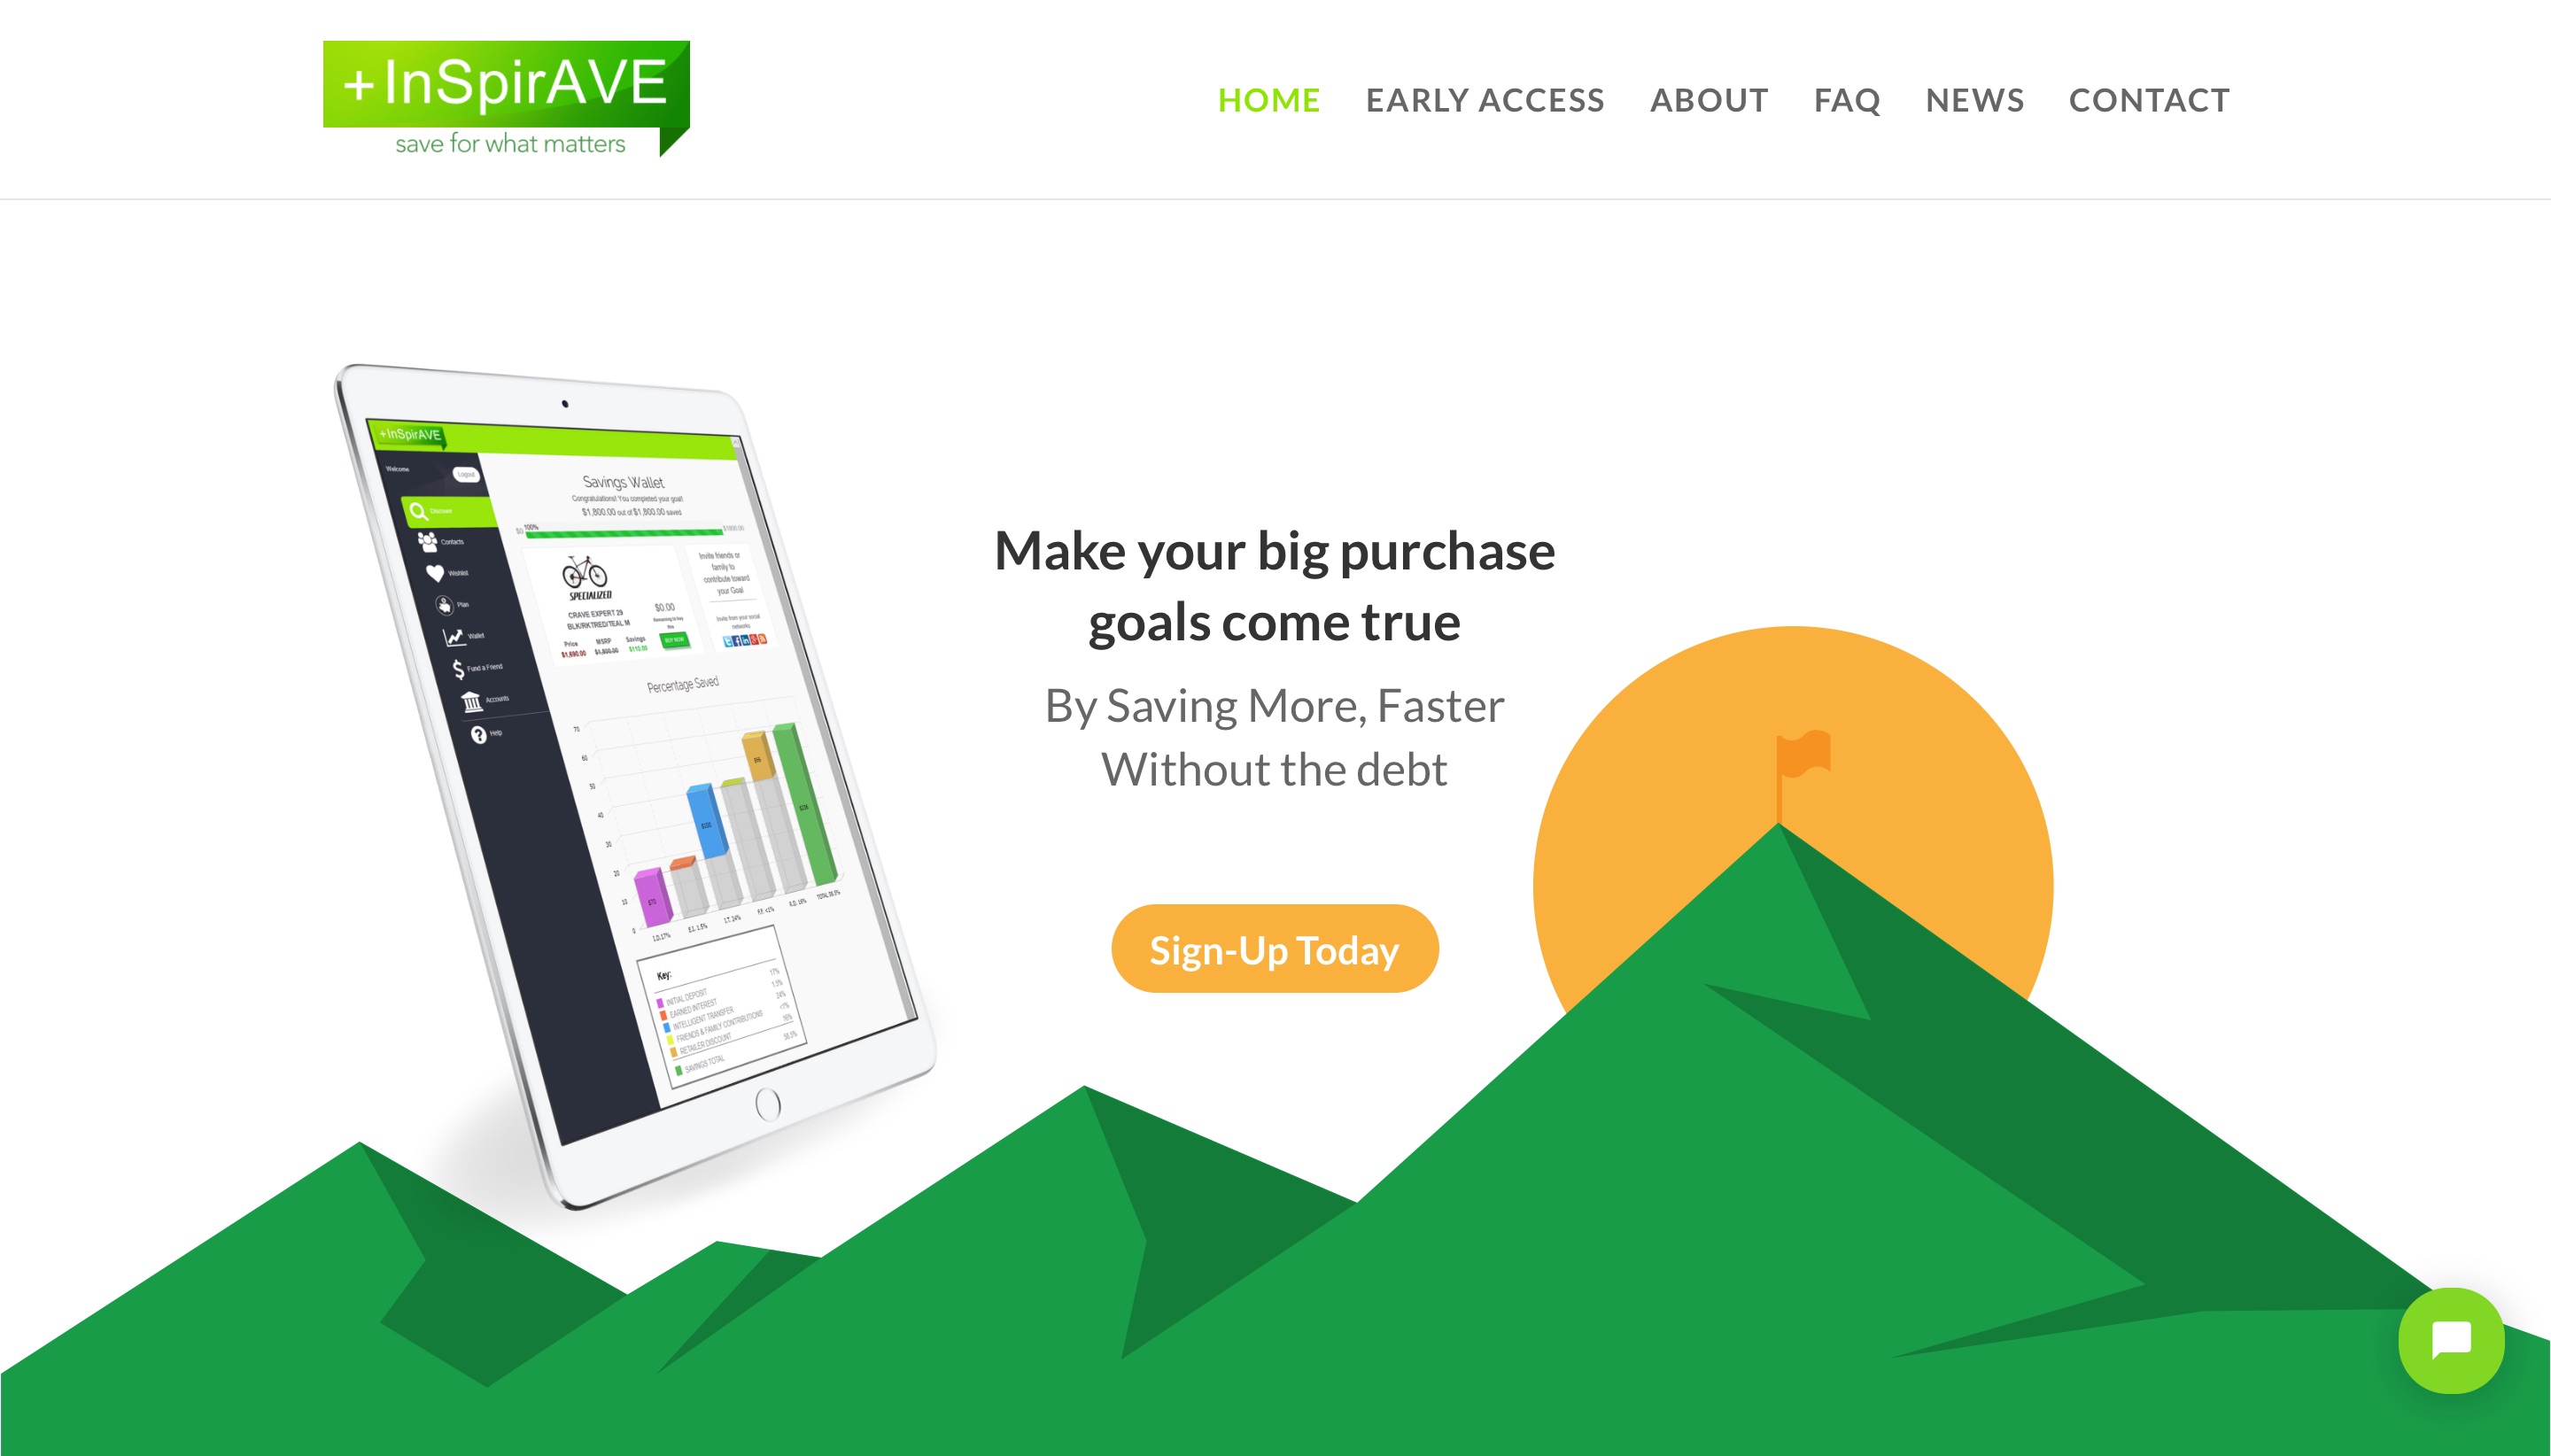 Saving for What Matters: A Q&A with INSPIRAVE Founder and CEO Om Kundu